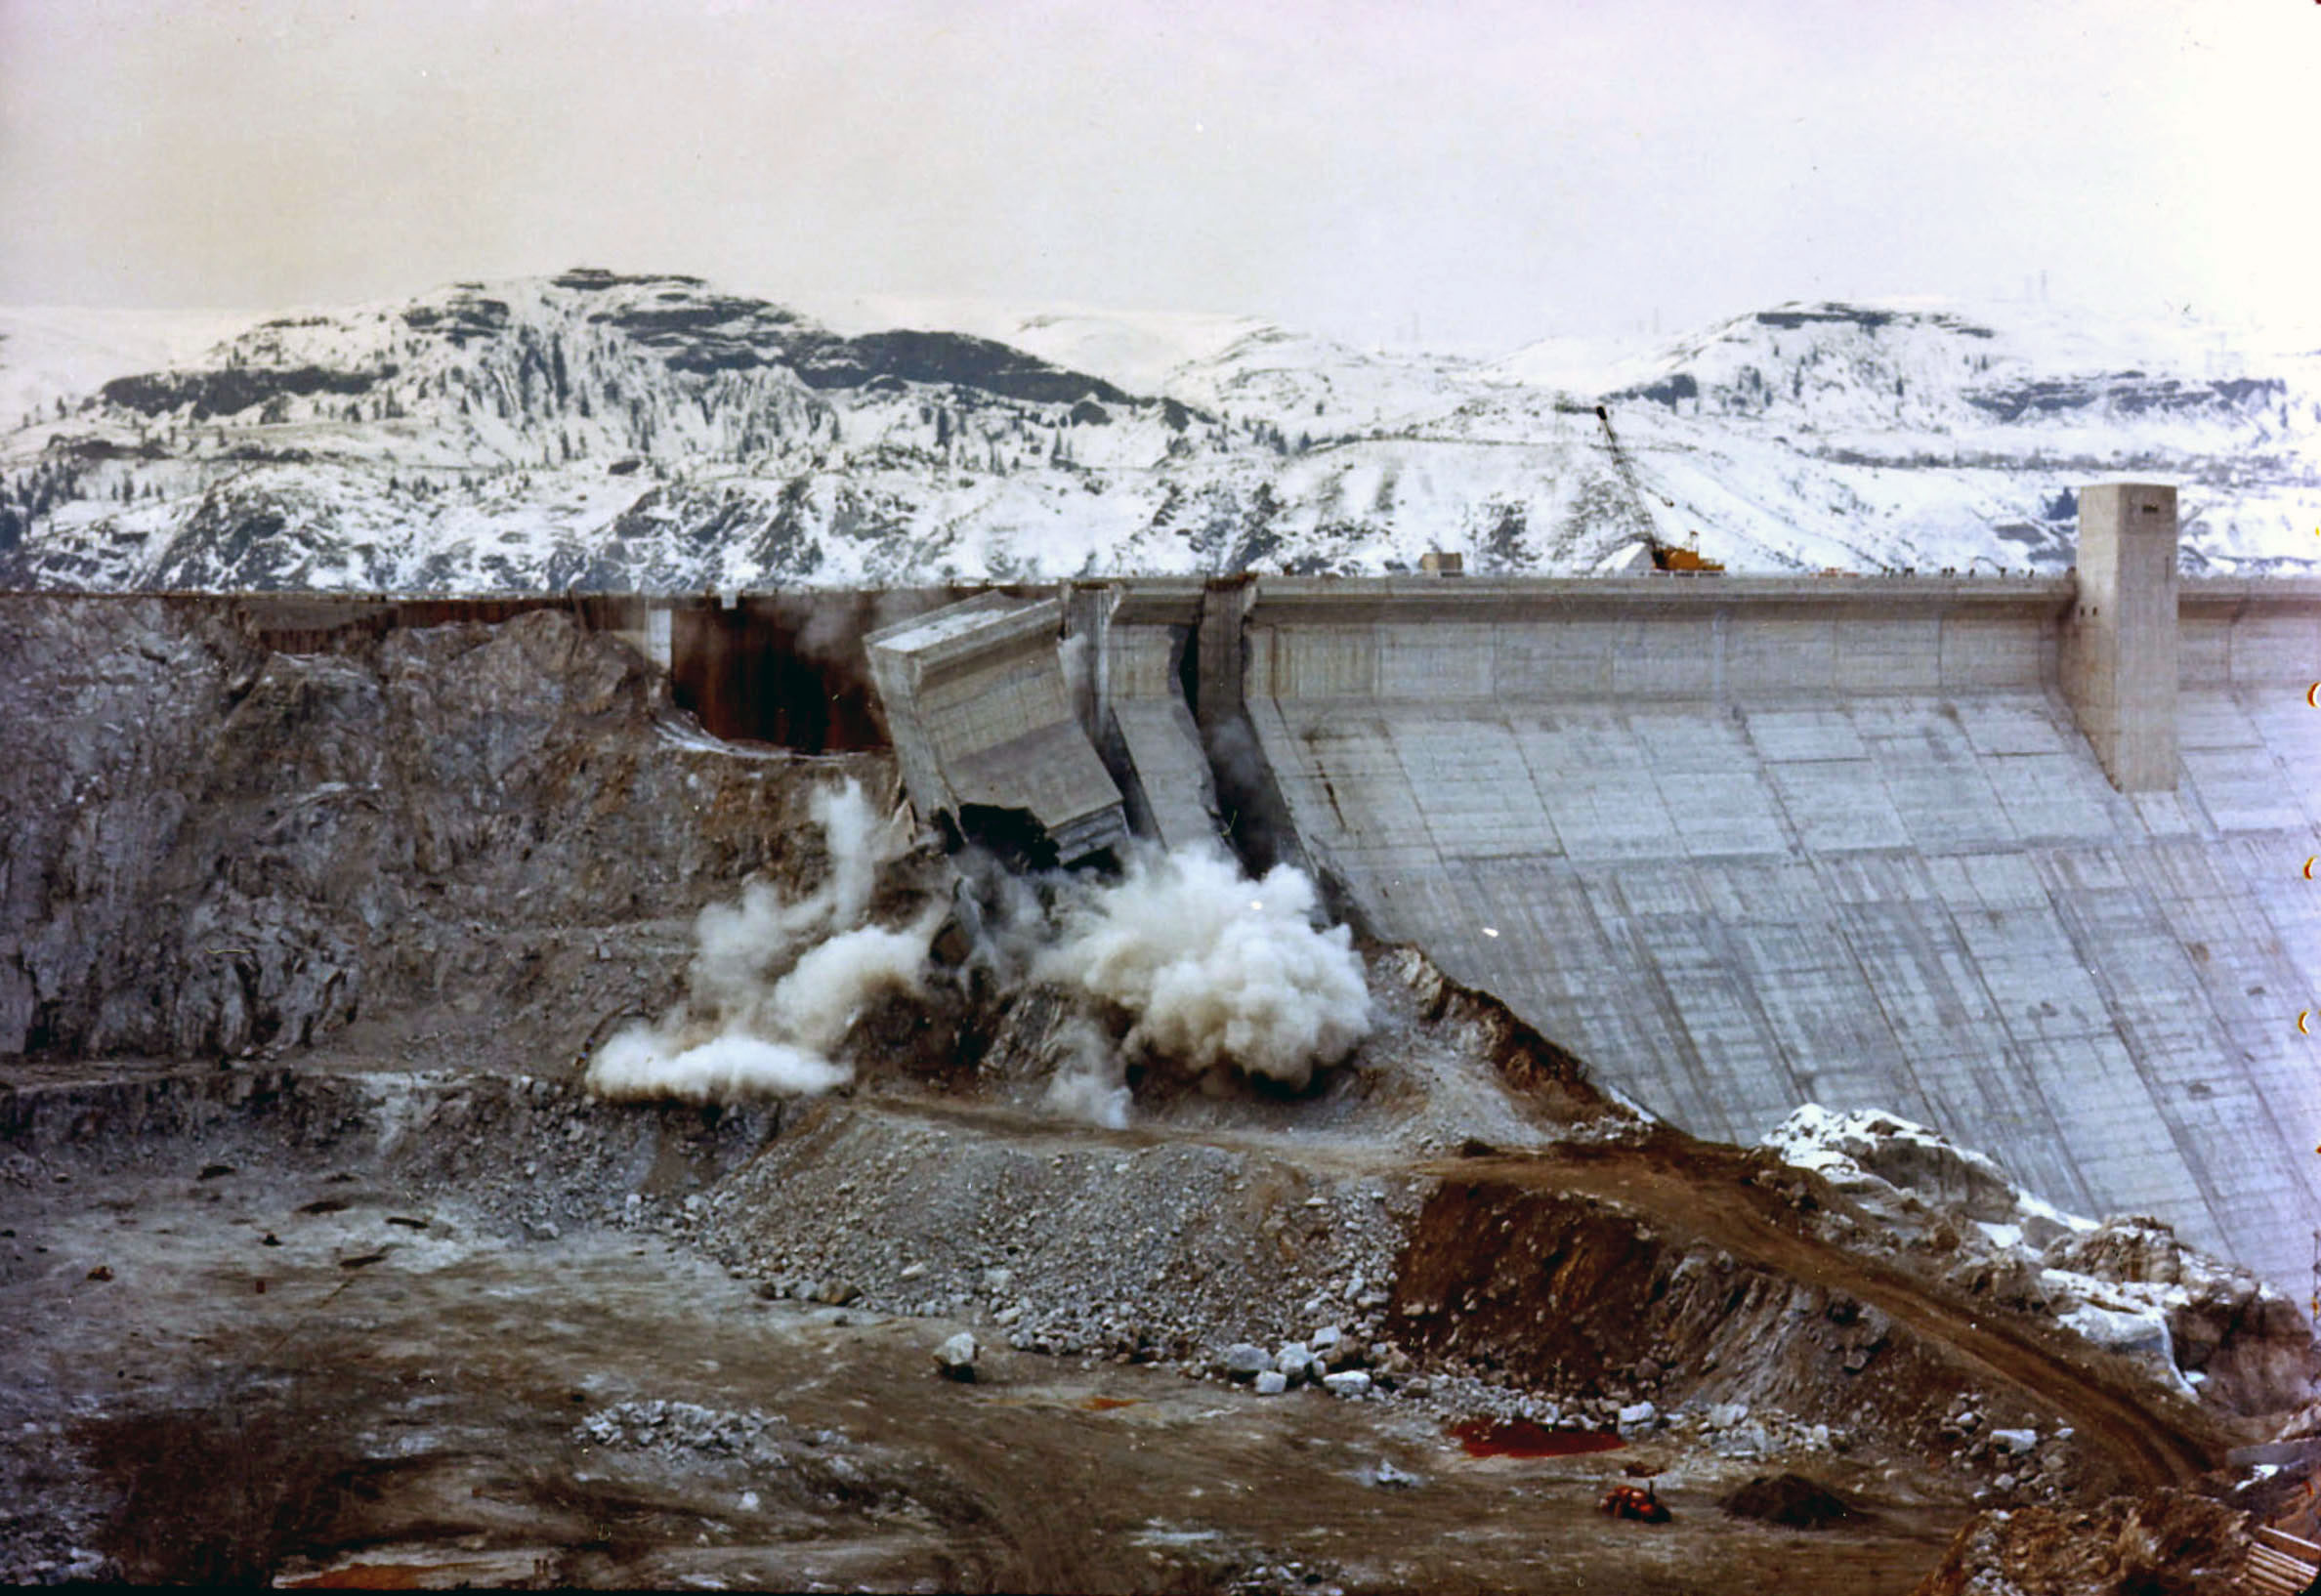 February 28, 1969. Taking off the end of Grand Coulee Dam.